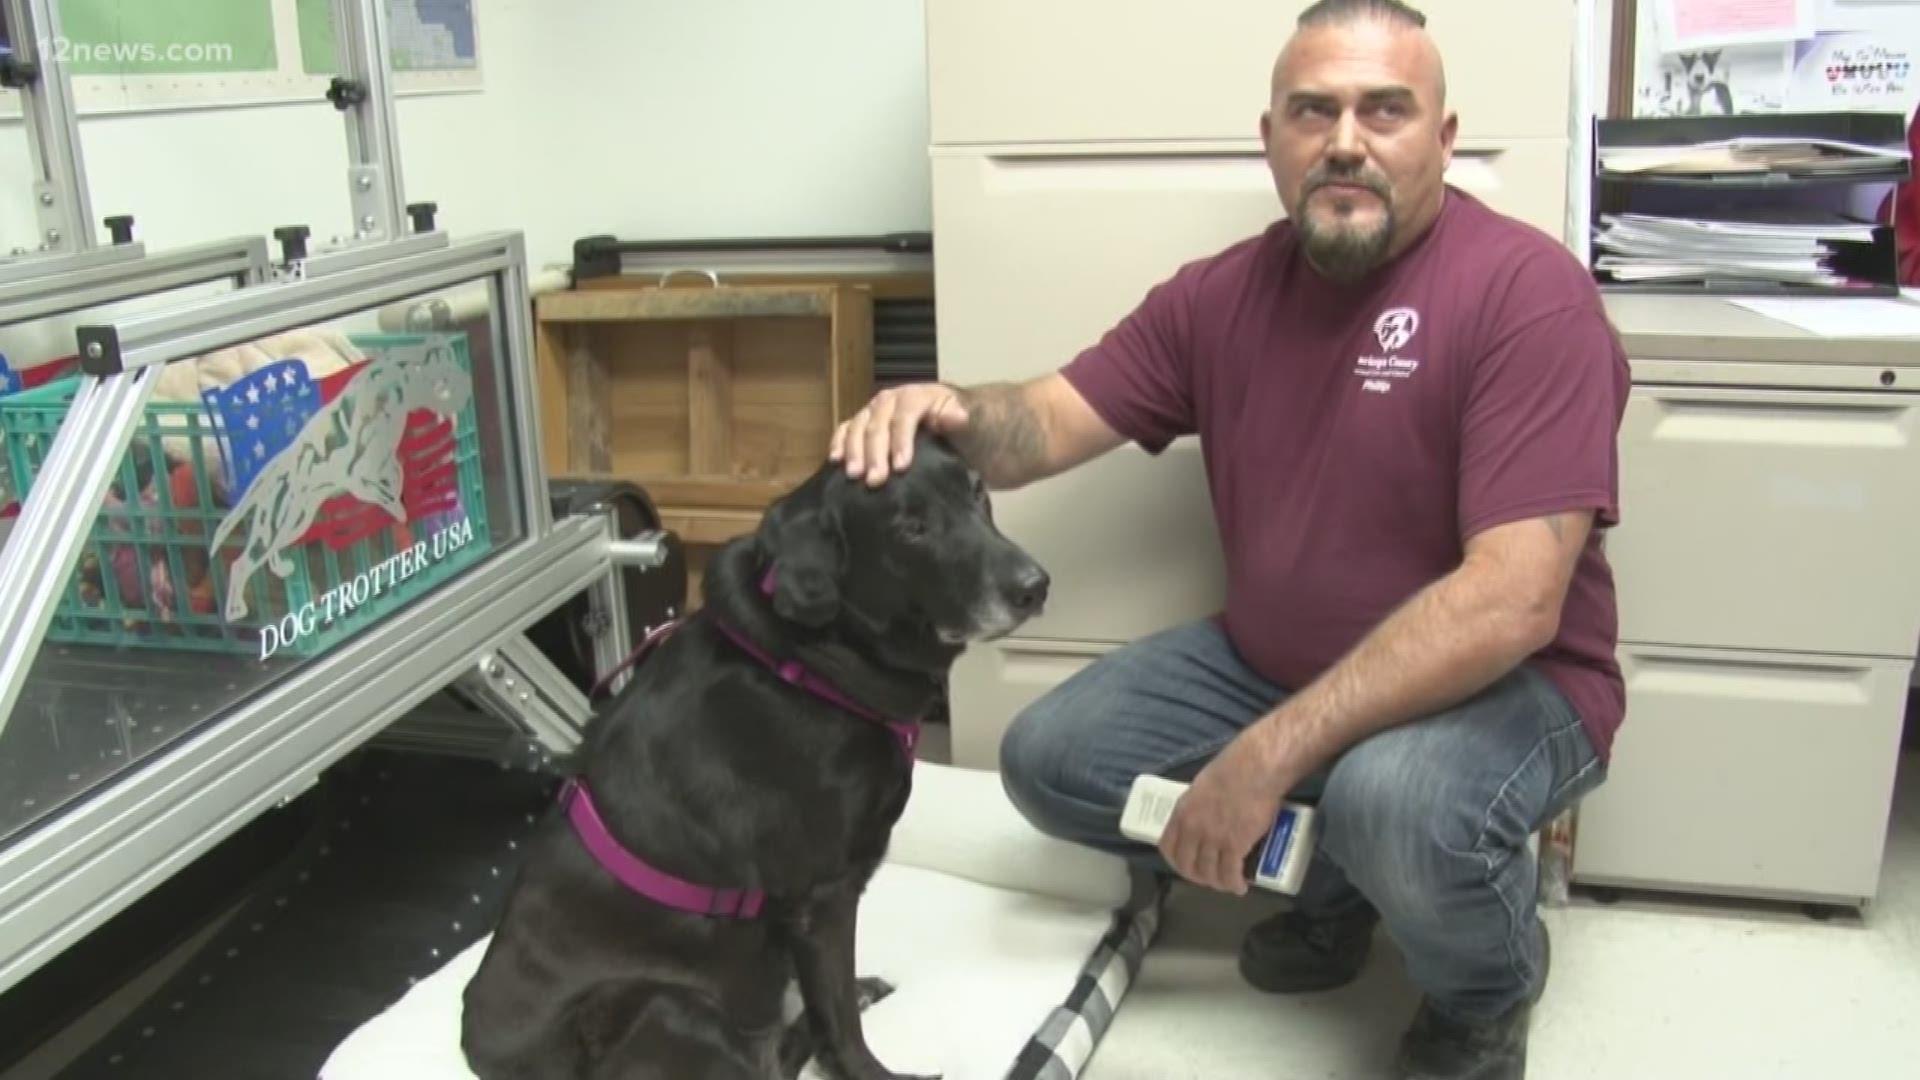 Chanel, the black lab, has been missing since 2013. Her owners thought she was gone forever when her family got a call that she had been found after five years of being gone. Her microchip is what eventually led to her being reunited with her family.